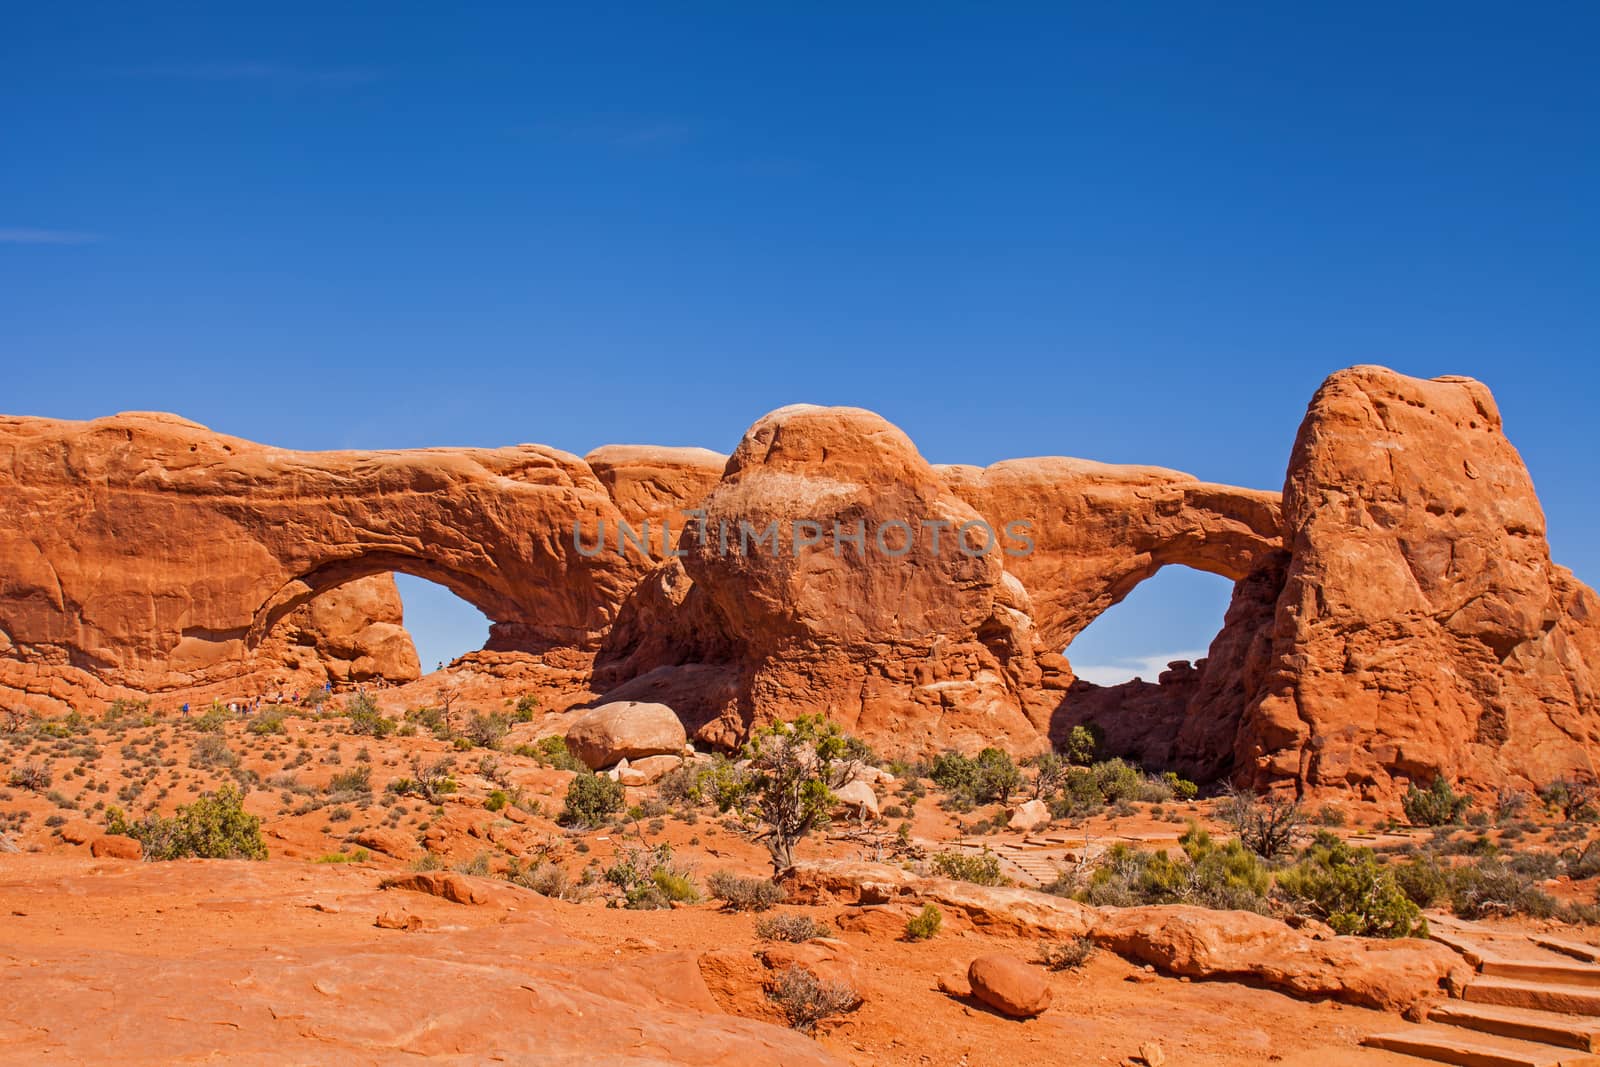 The North and South windows in Arches National Park. by kobus_peche